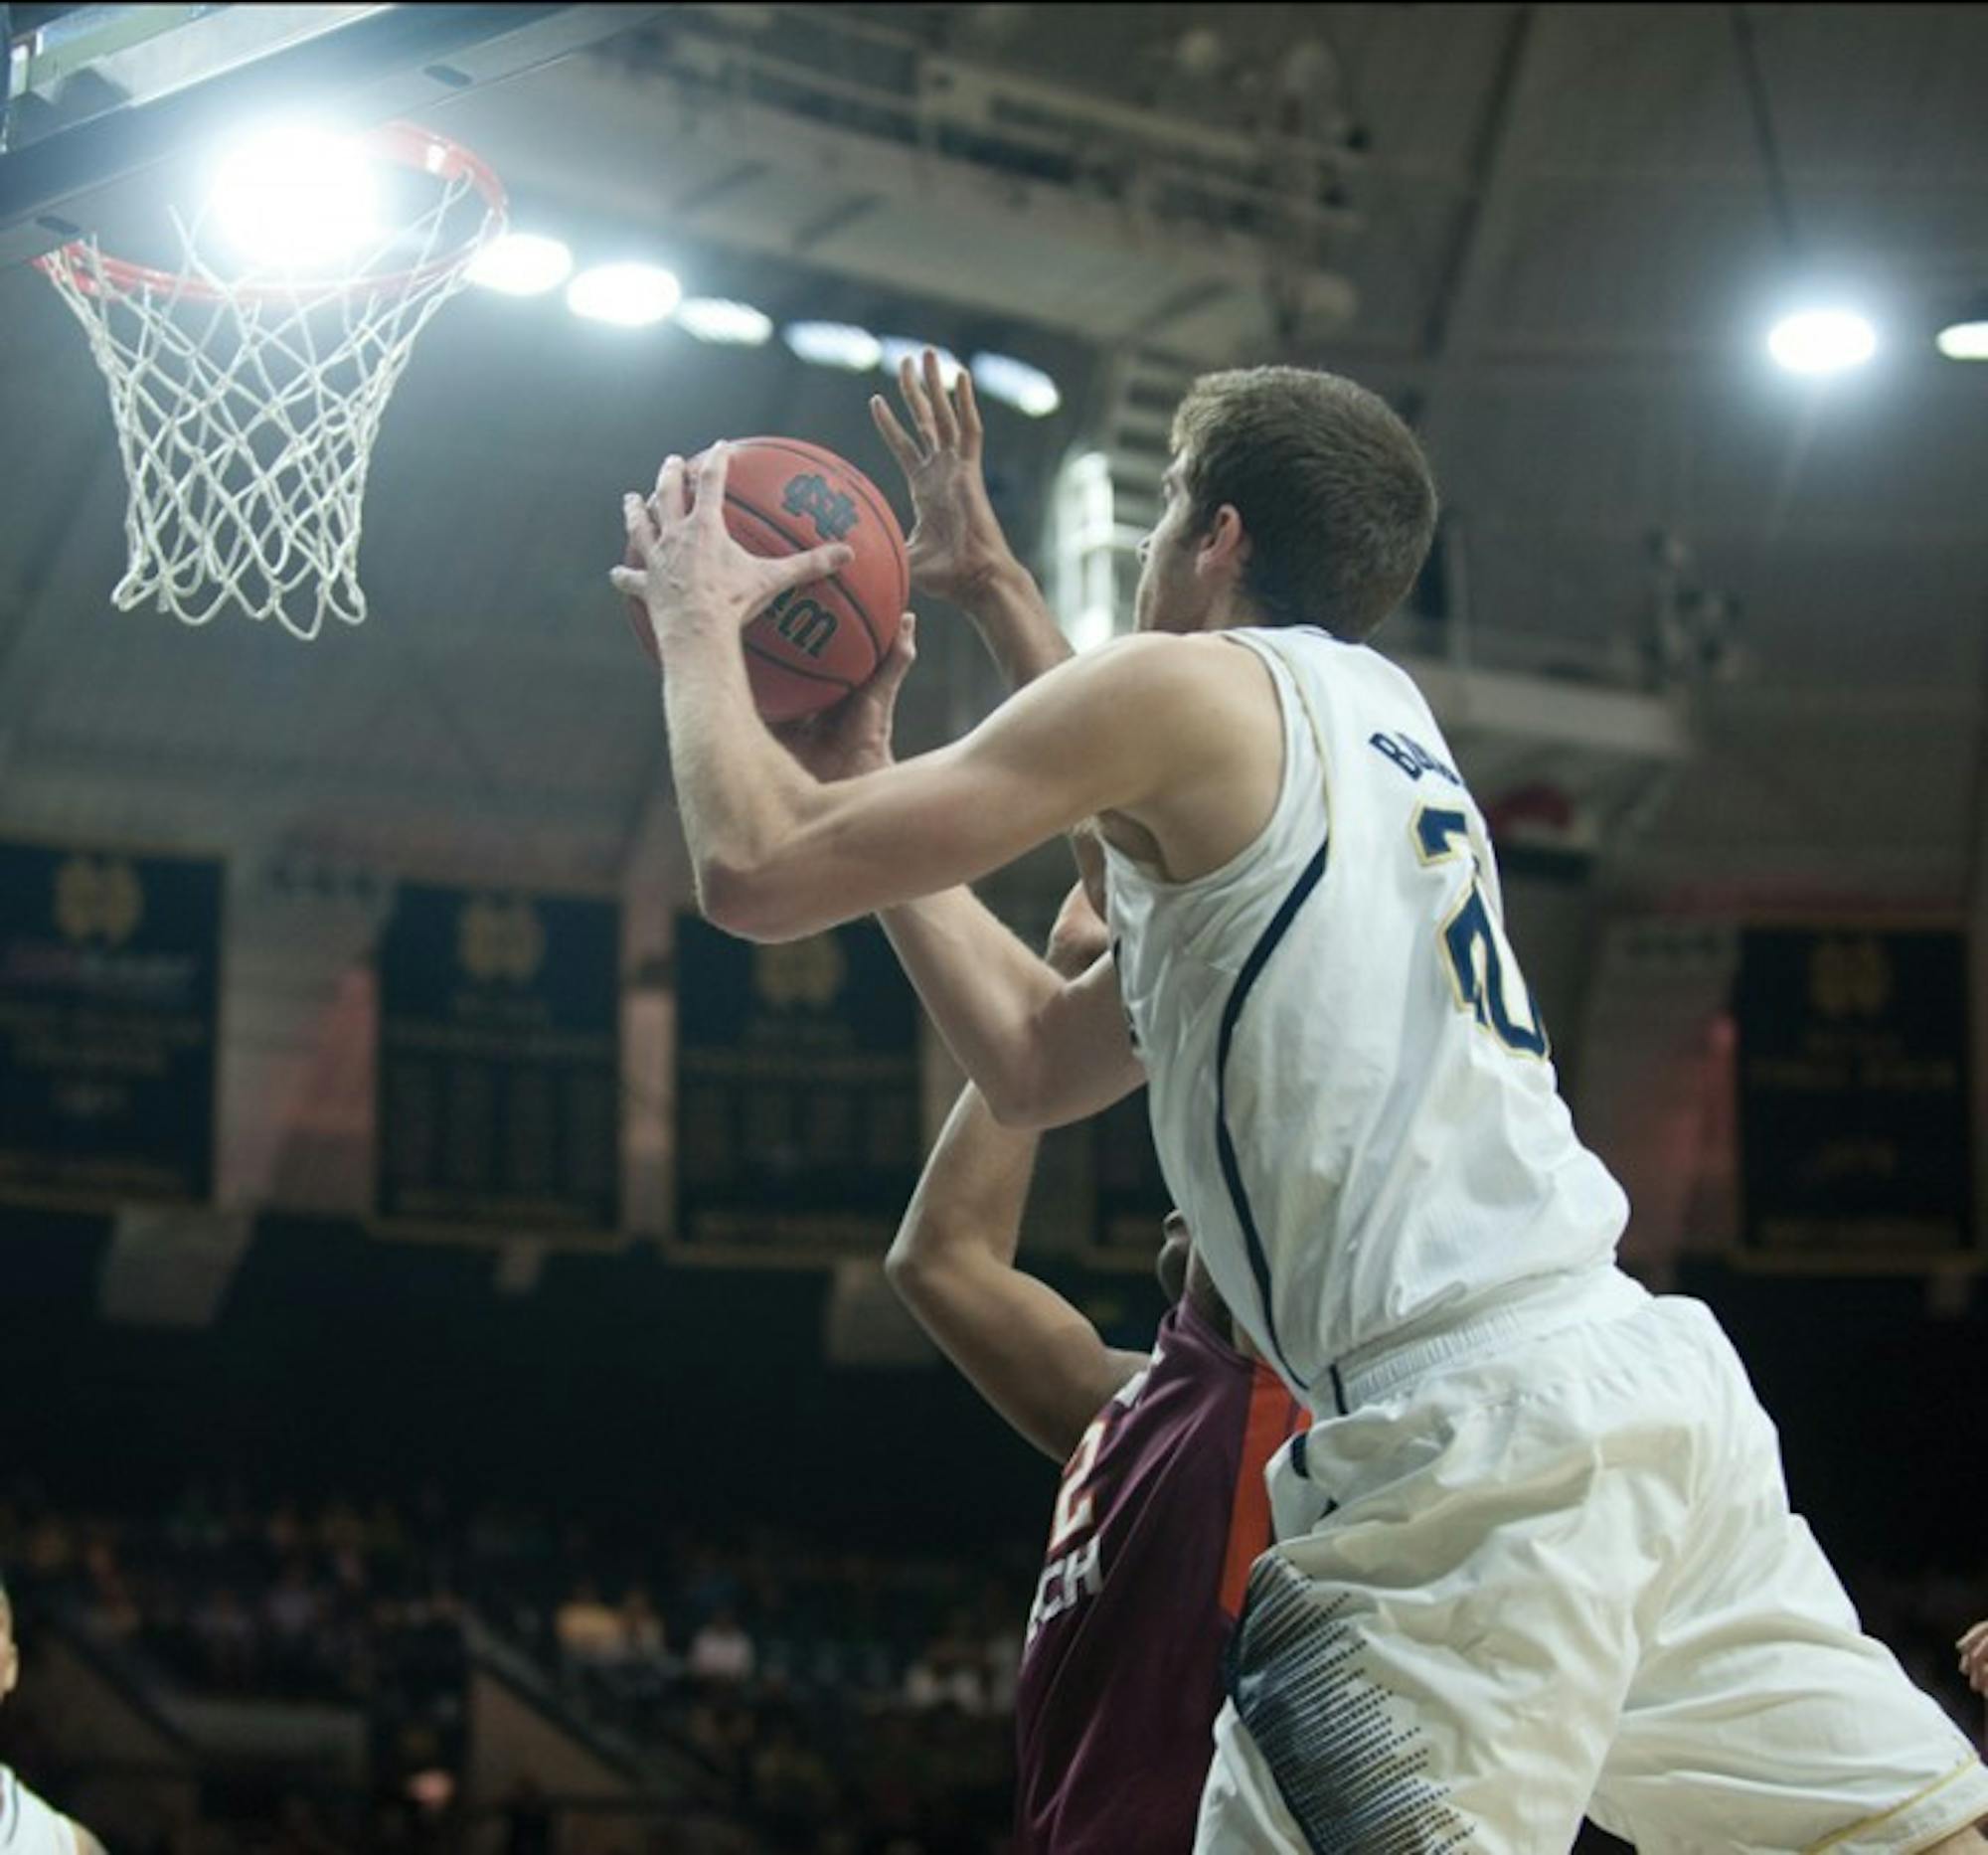 Irish sophomore forward Austin Burgett goes up for a shot during Notre Dame's 70-63 win over Virginia Tech on Jan. 19.